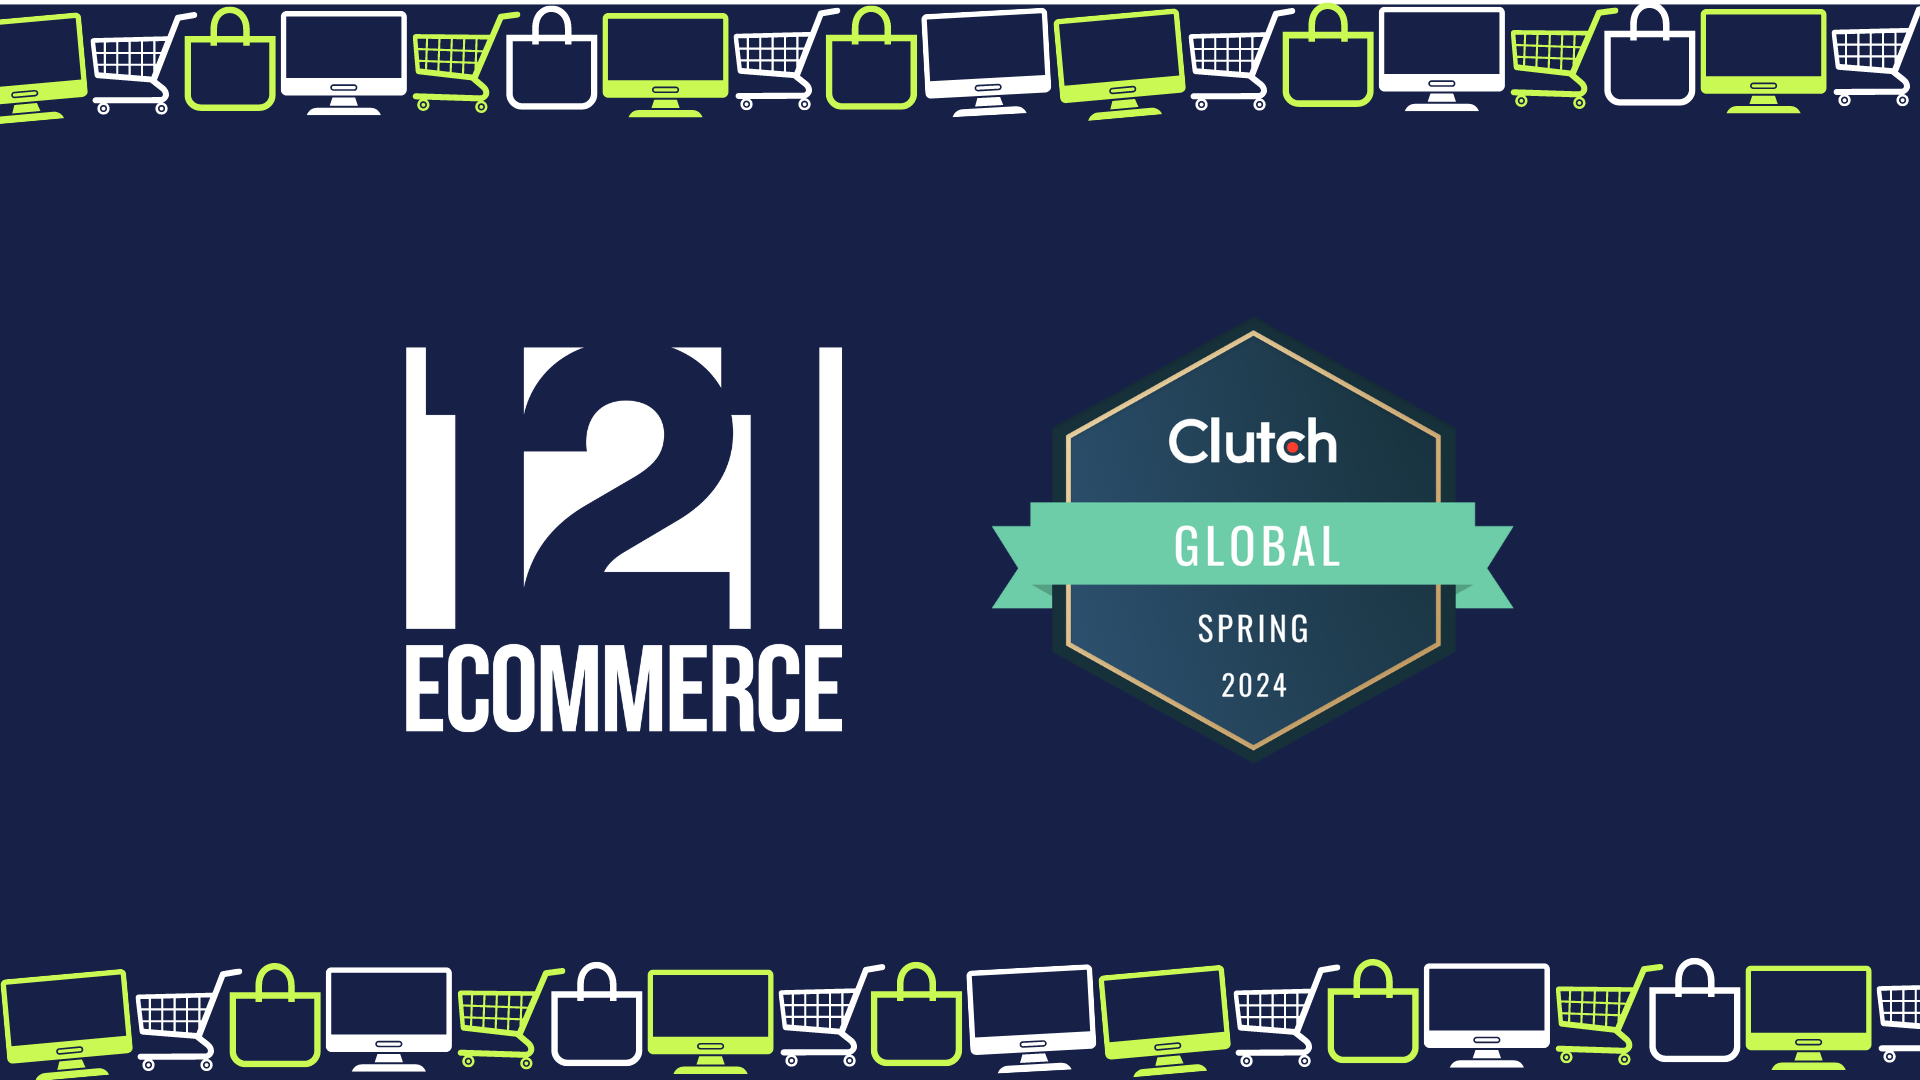 121eCommerce Recognized as a Clutch Global Leader for Spring 2024